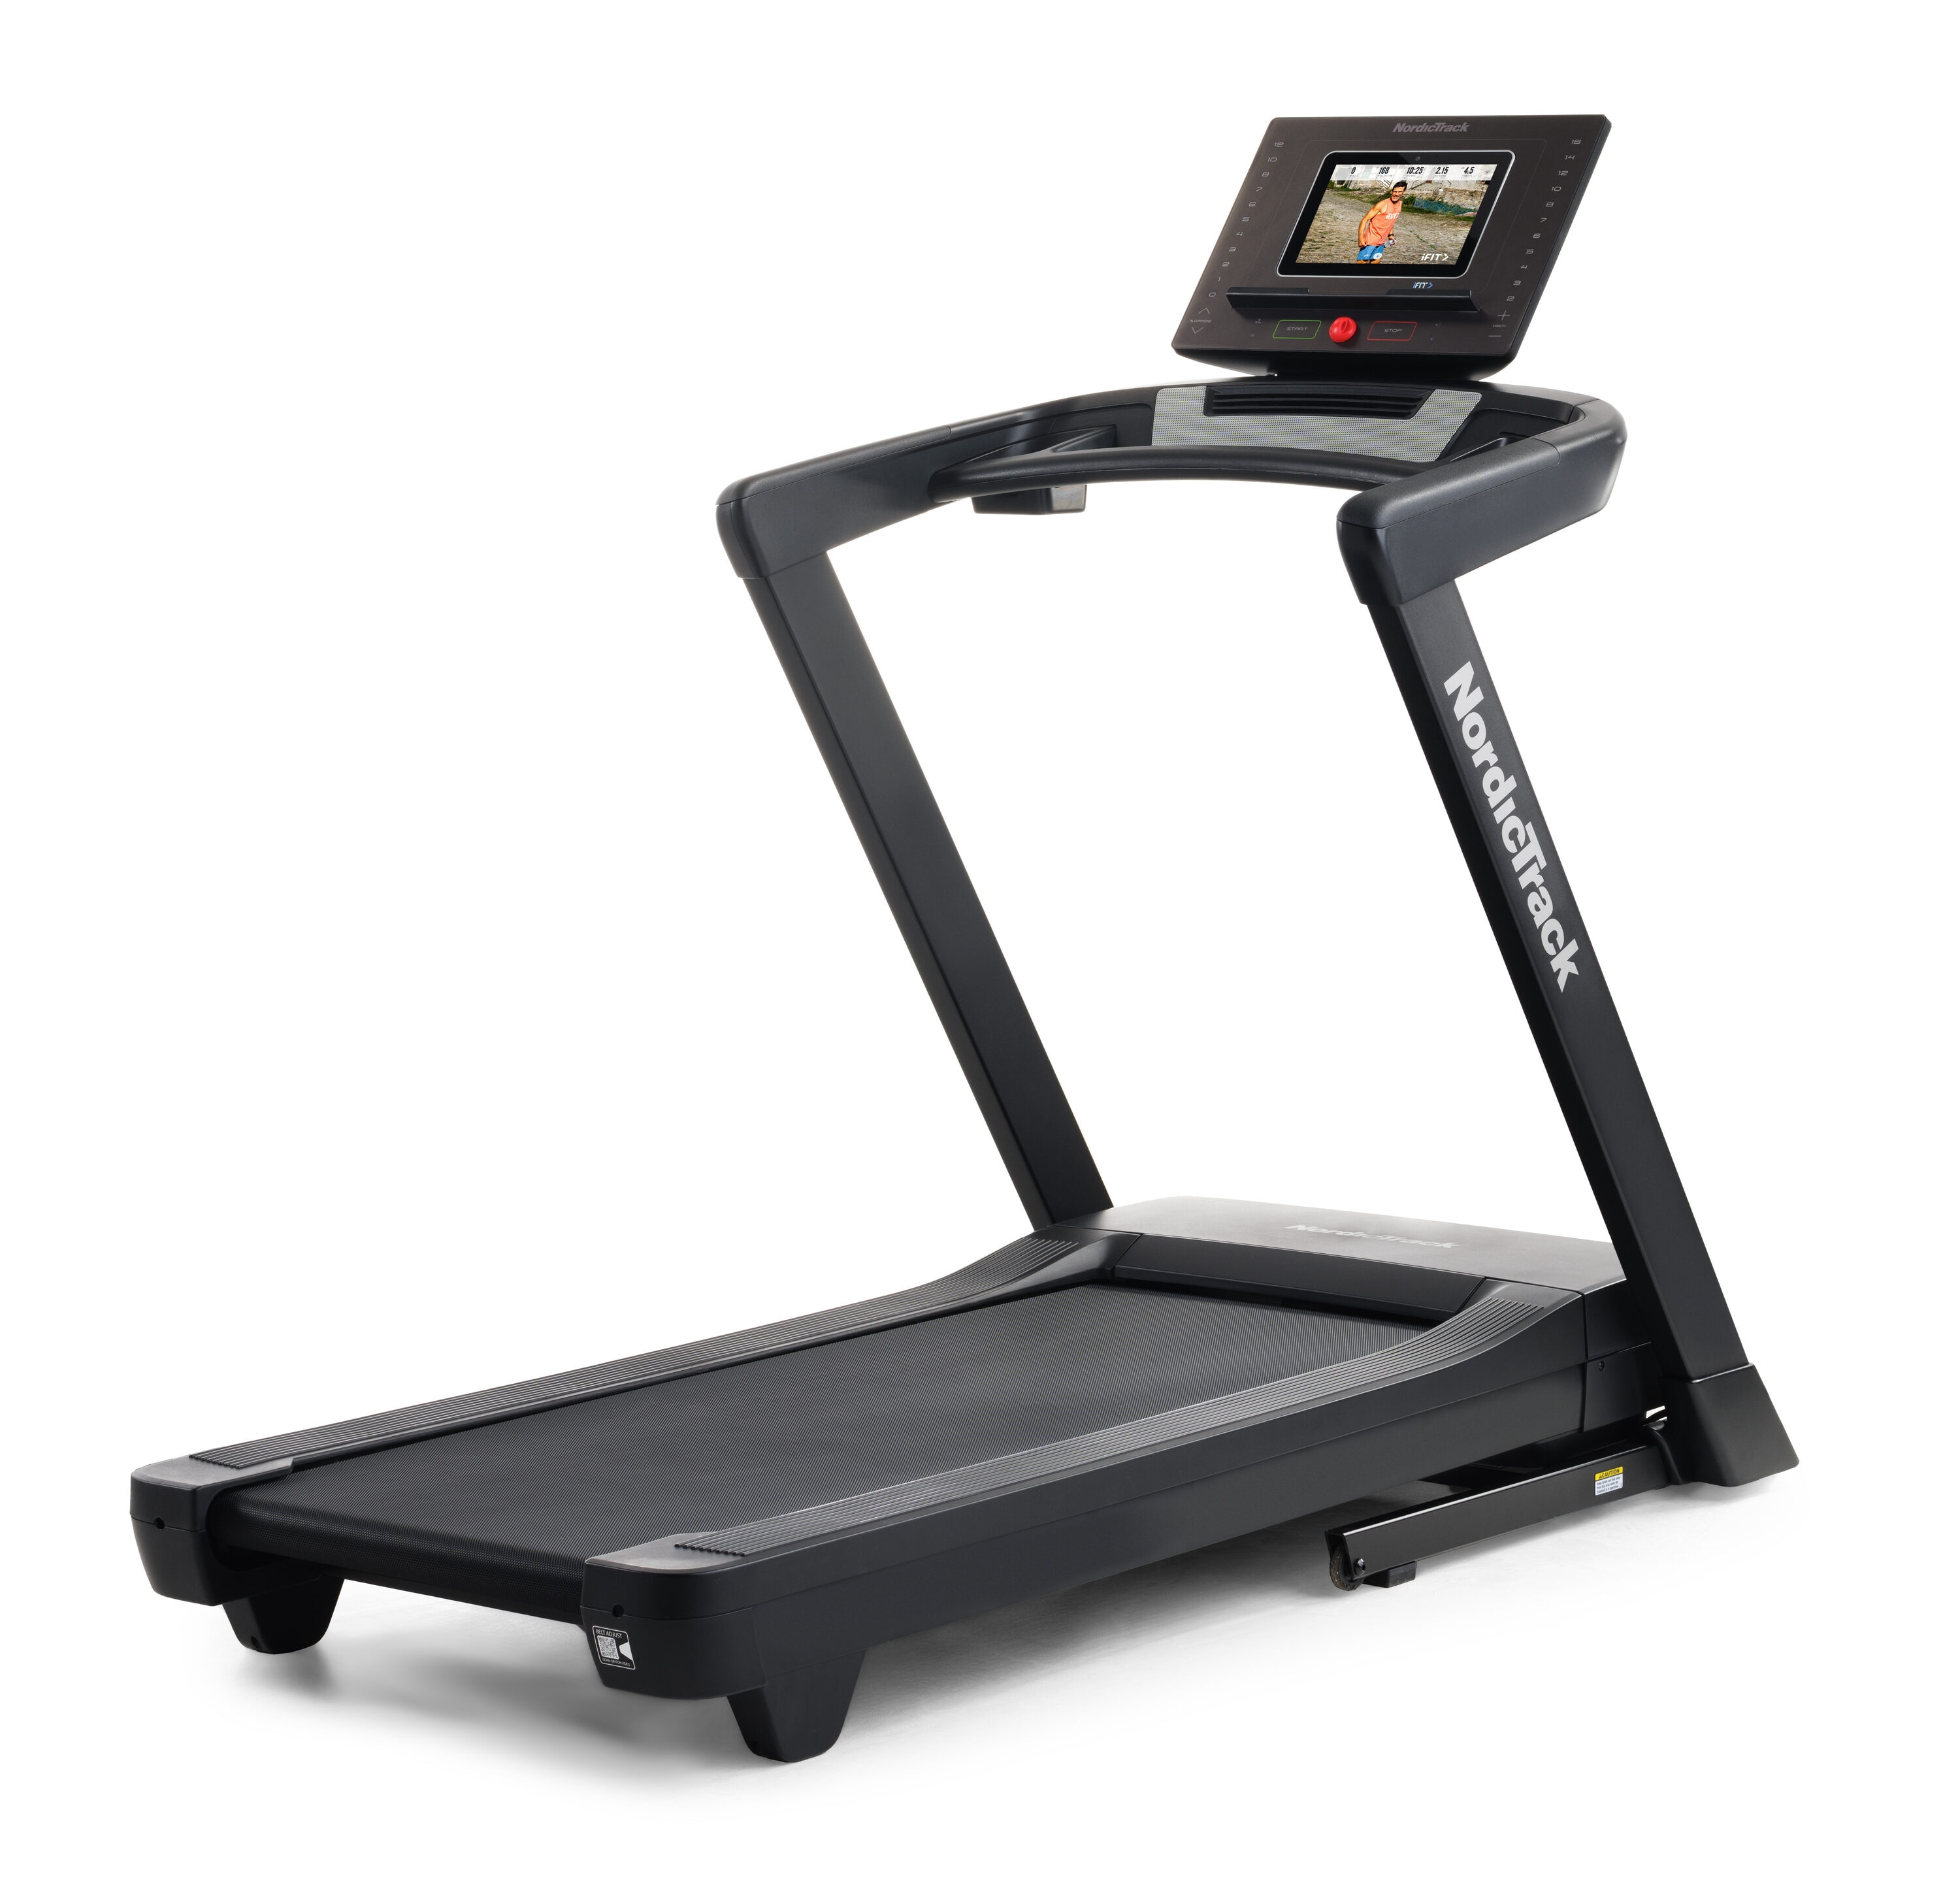 NORDICTRACK EXP 10i Treadmill - Foldable, LED Display, Heart Rate ...